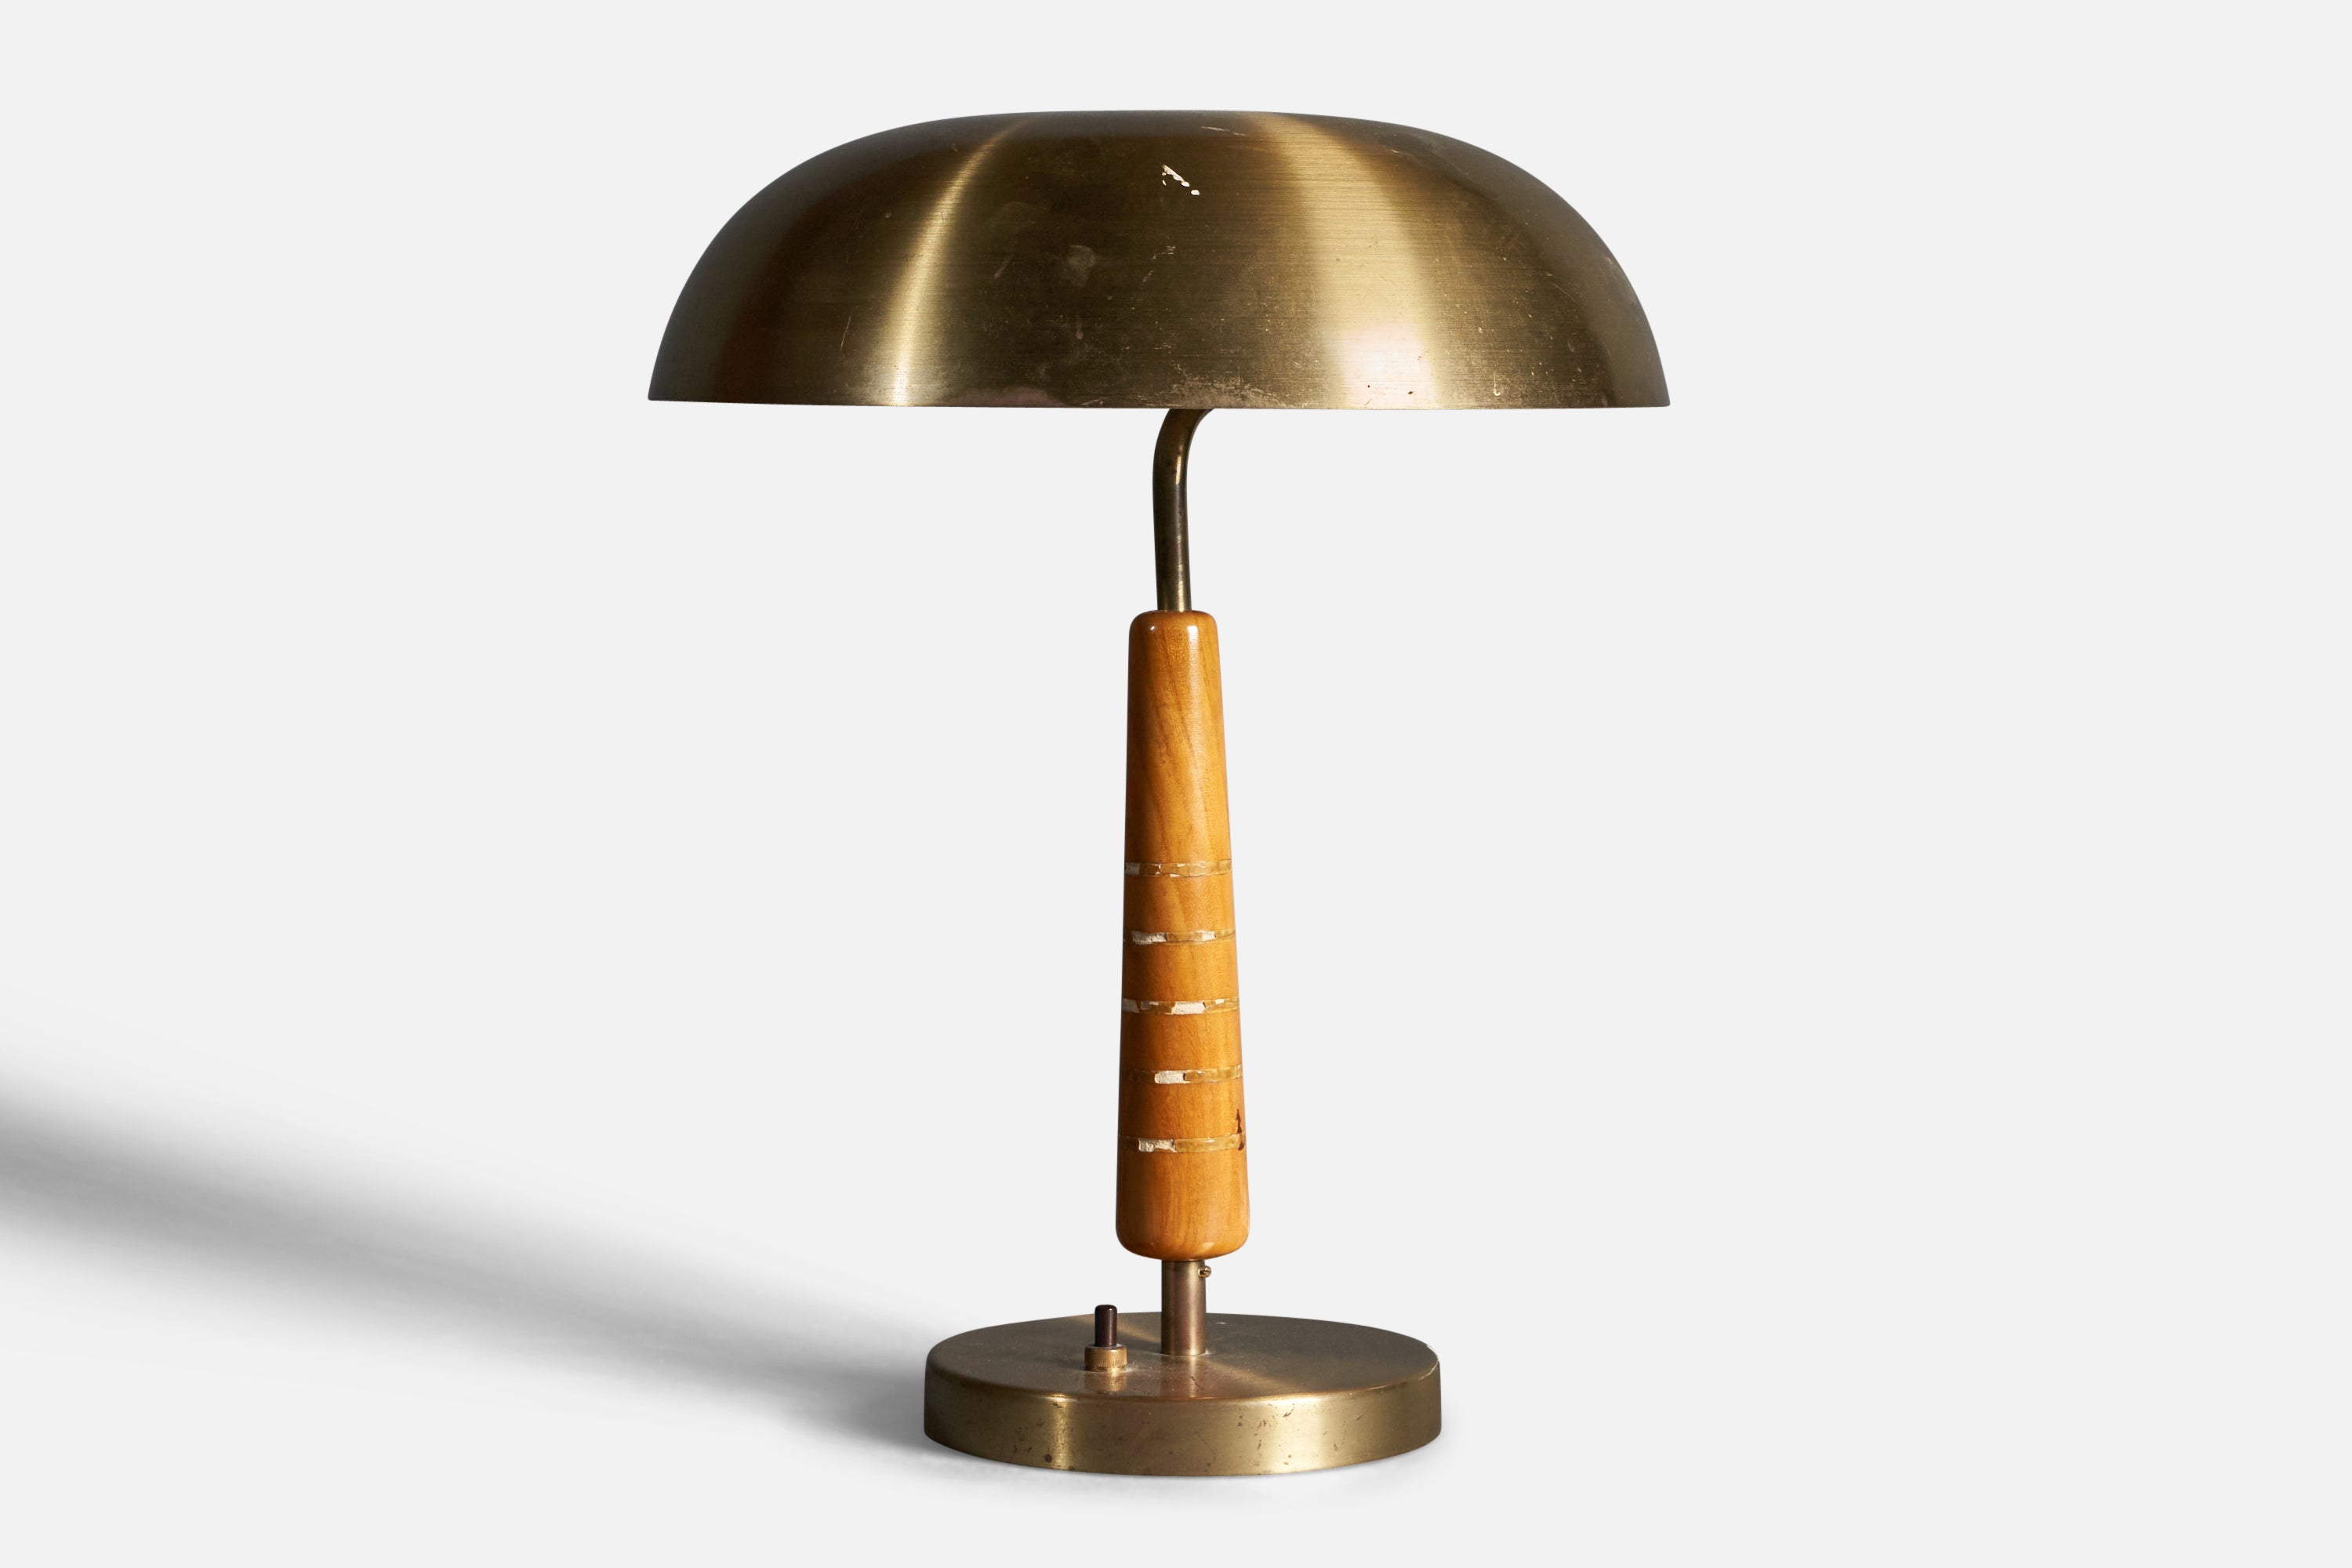 Swedish Modernist Designer, Table Lamp, Brass, Stained Oak, Wood Inlays, 1940s